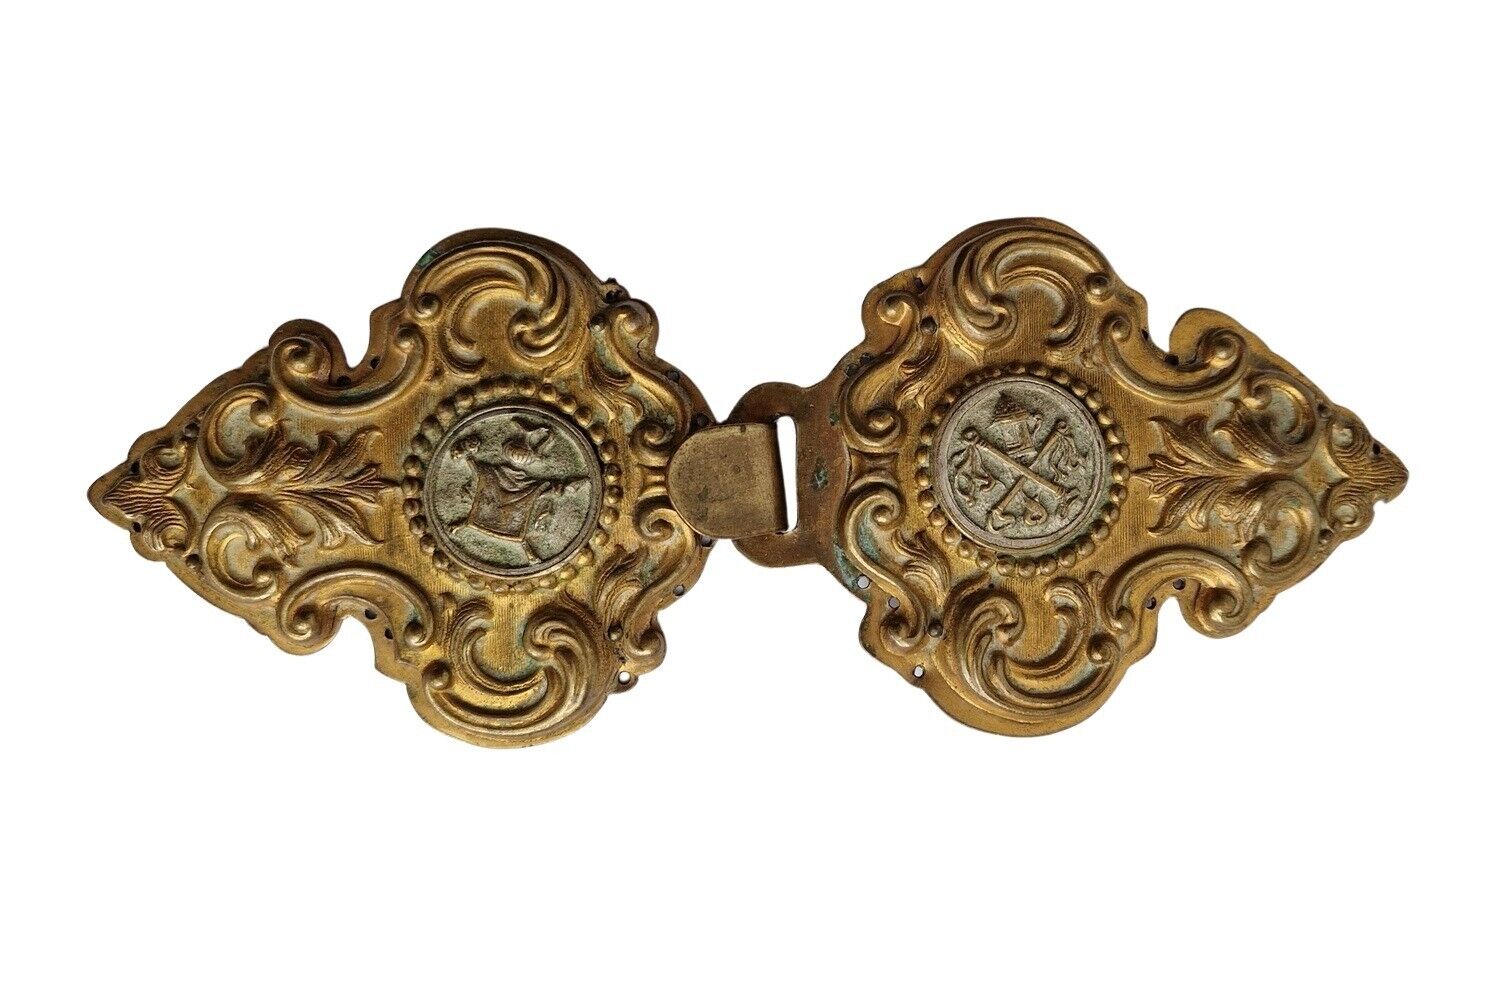 Clasp for Mantle, Vestment, Ornate, 18/19th Century (# 17452)